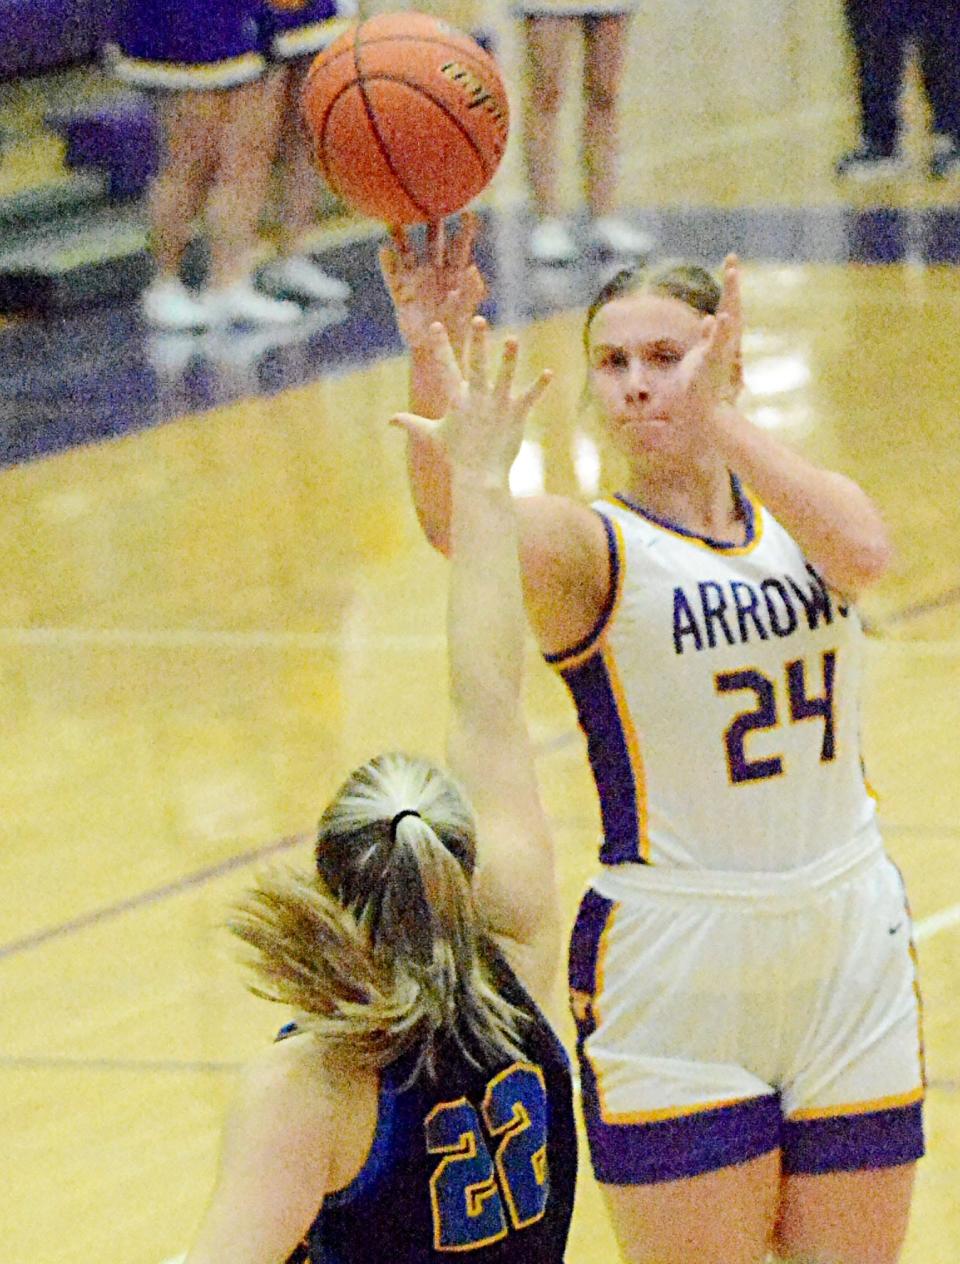 Watertown's Jade Lund takes aim at one of her seven successful 3-pointers during a high school girls basketball game against Aberdeen Central on Monday, Feb. 20, 2023 in the Watertown Civic Arena.